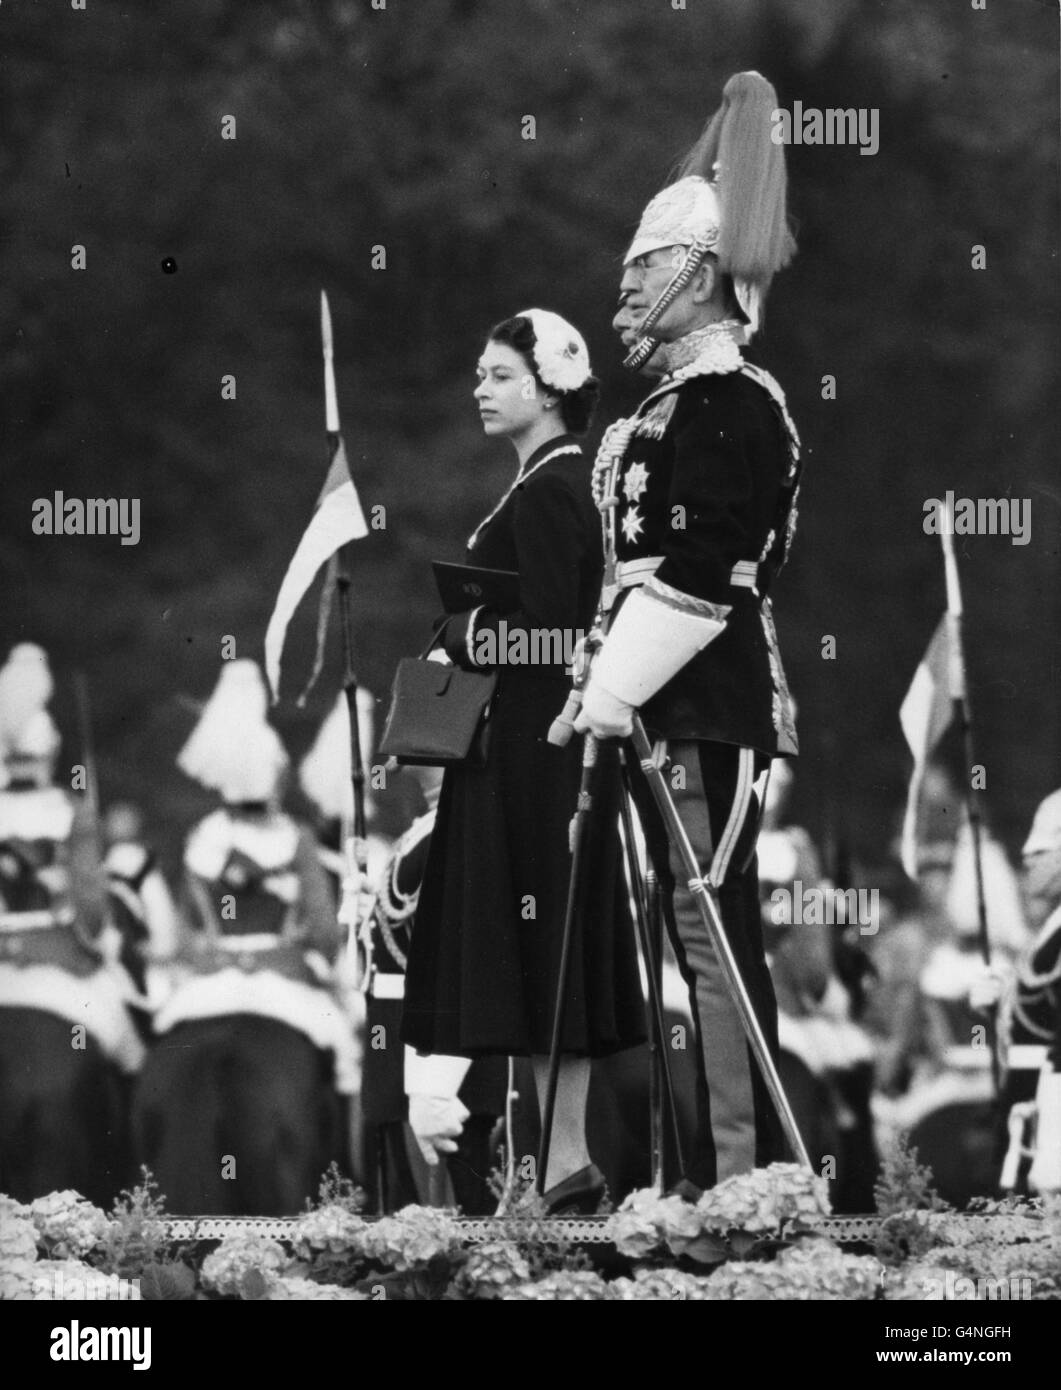 Queen Elizabeth II standing with Household Cavalry officers as she takes the salute at the march past, after she had presented new Colours to the Household Cavalry (The Life Guards and the Royal Horse Guards), at Windsor Castle. Stock Photo